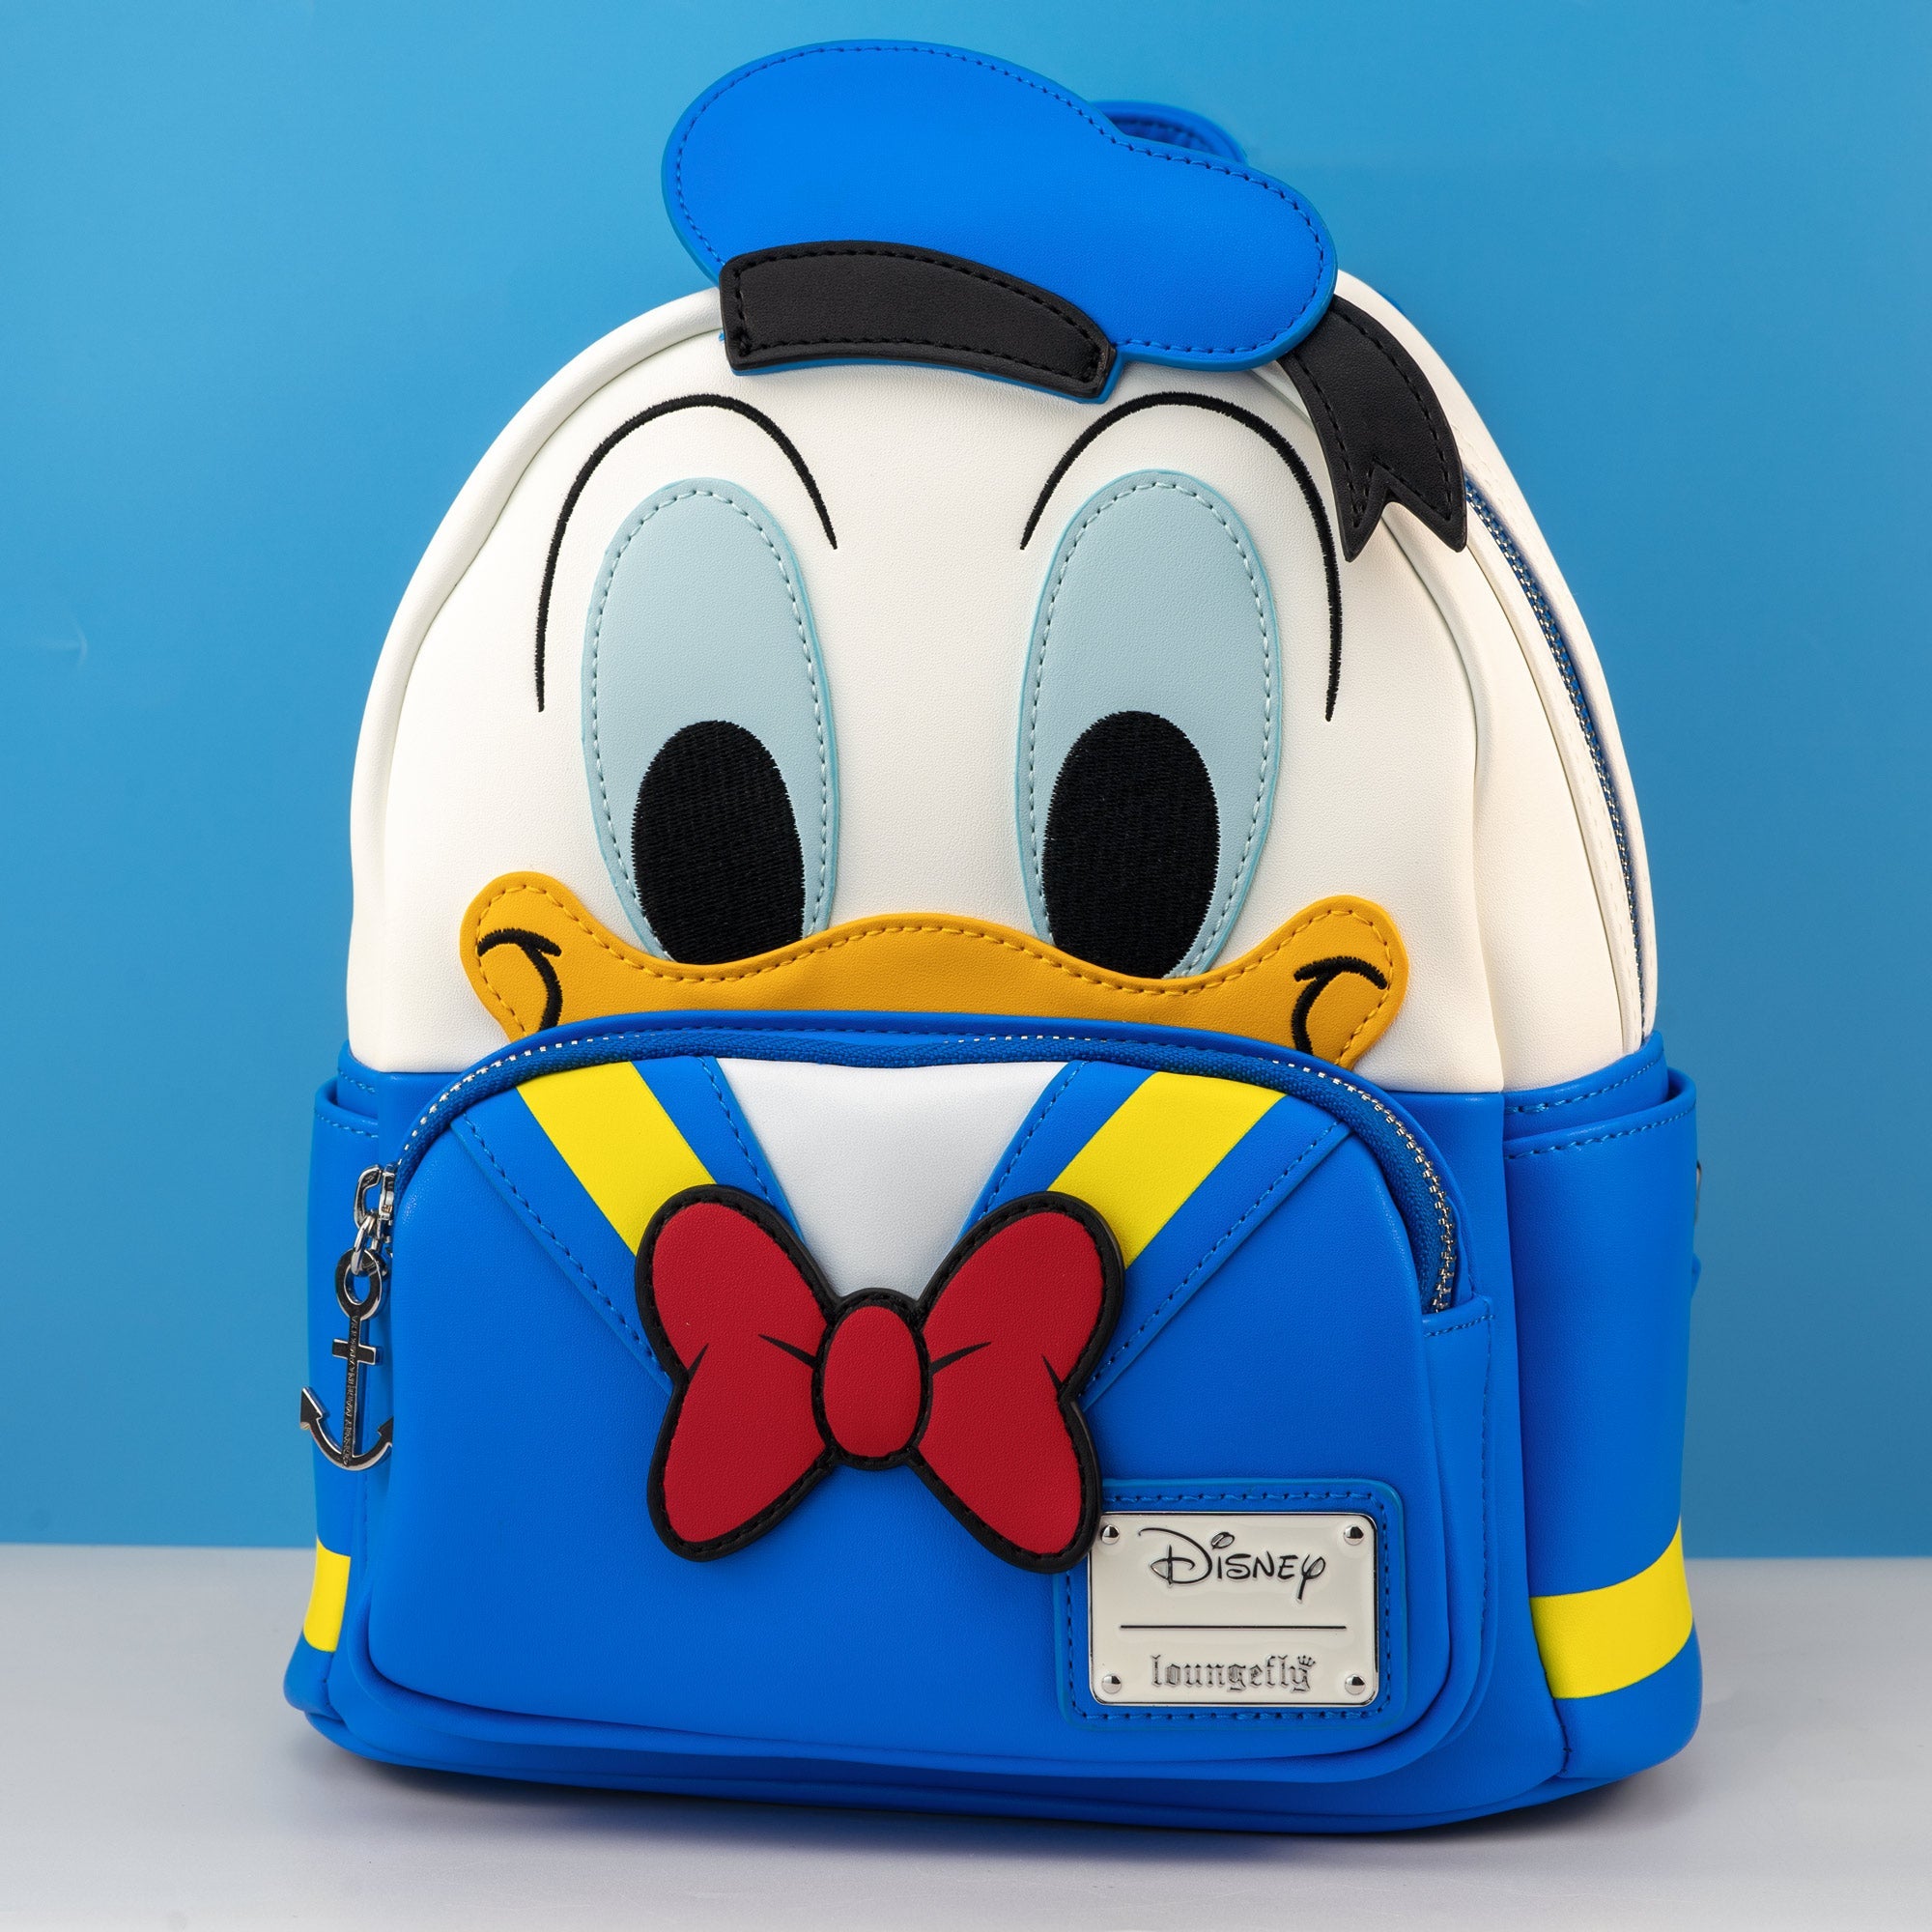 Loungefly x Disney Donald Duck Cosplay Mini Backpack - GeekCore